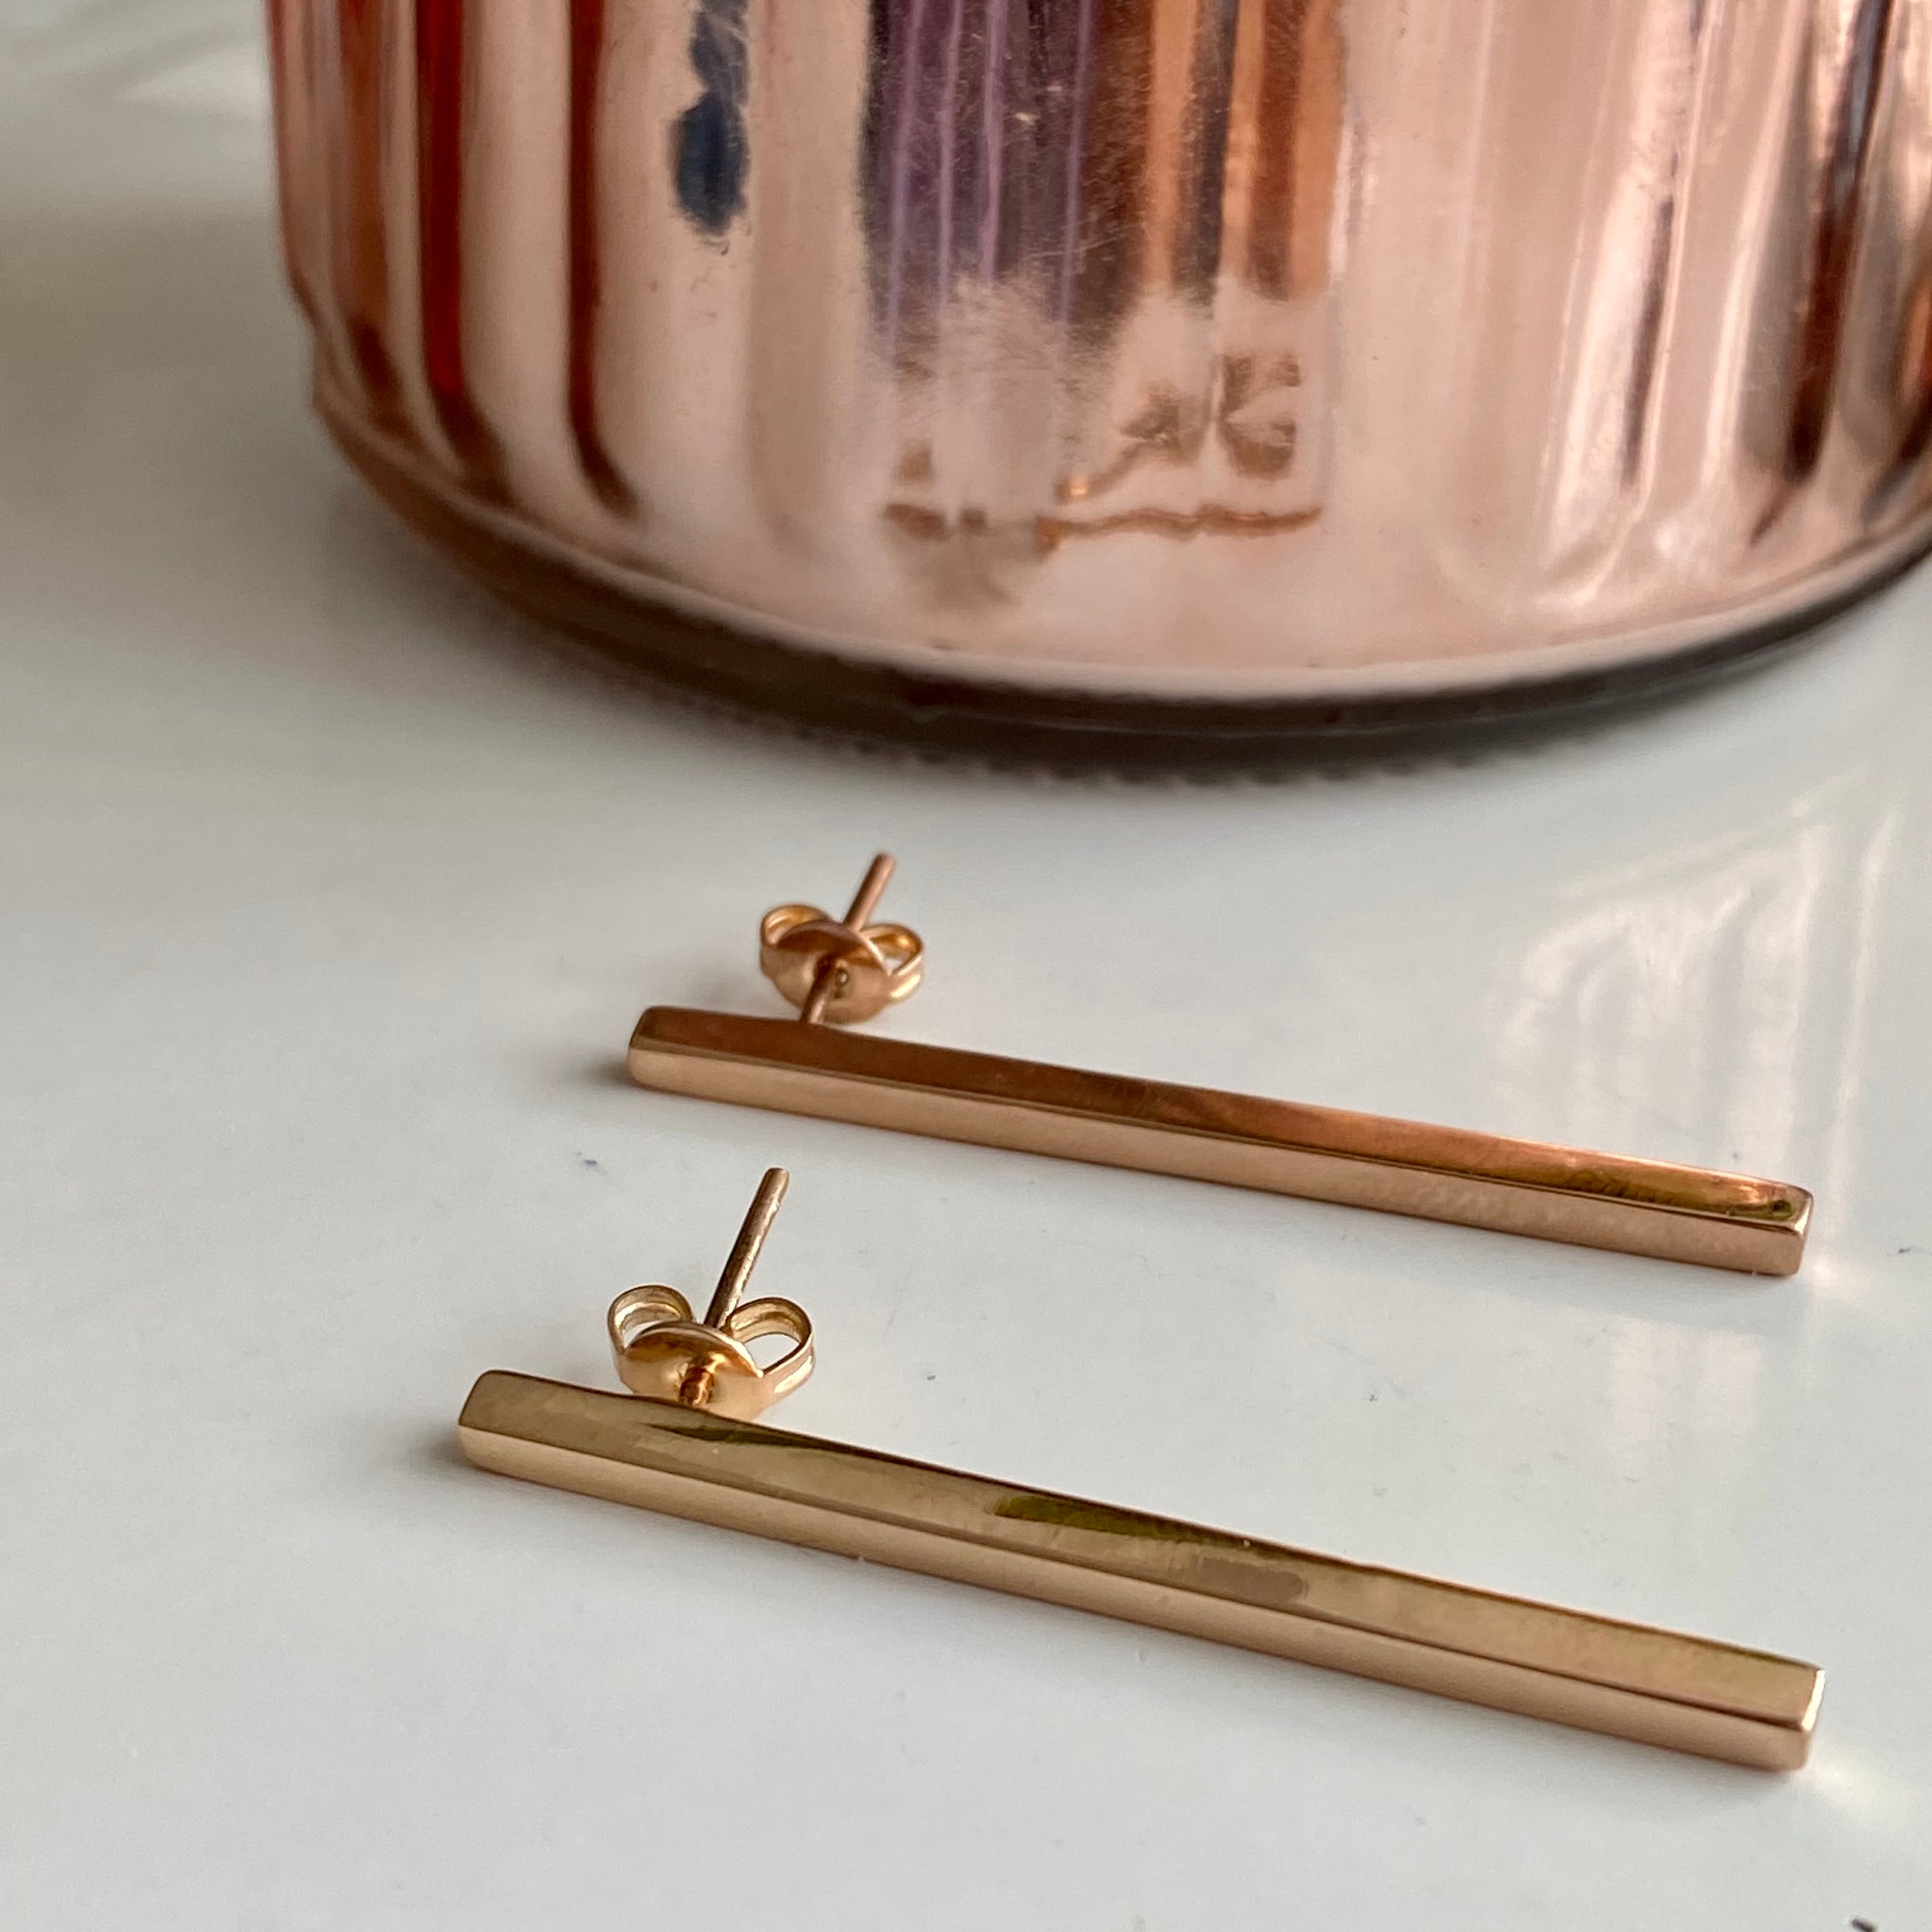 Long Cuboid Shaped Straight Bar Rose Gold Plated Sterling Silver Earrings